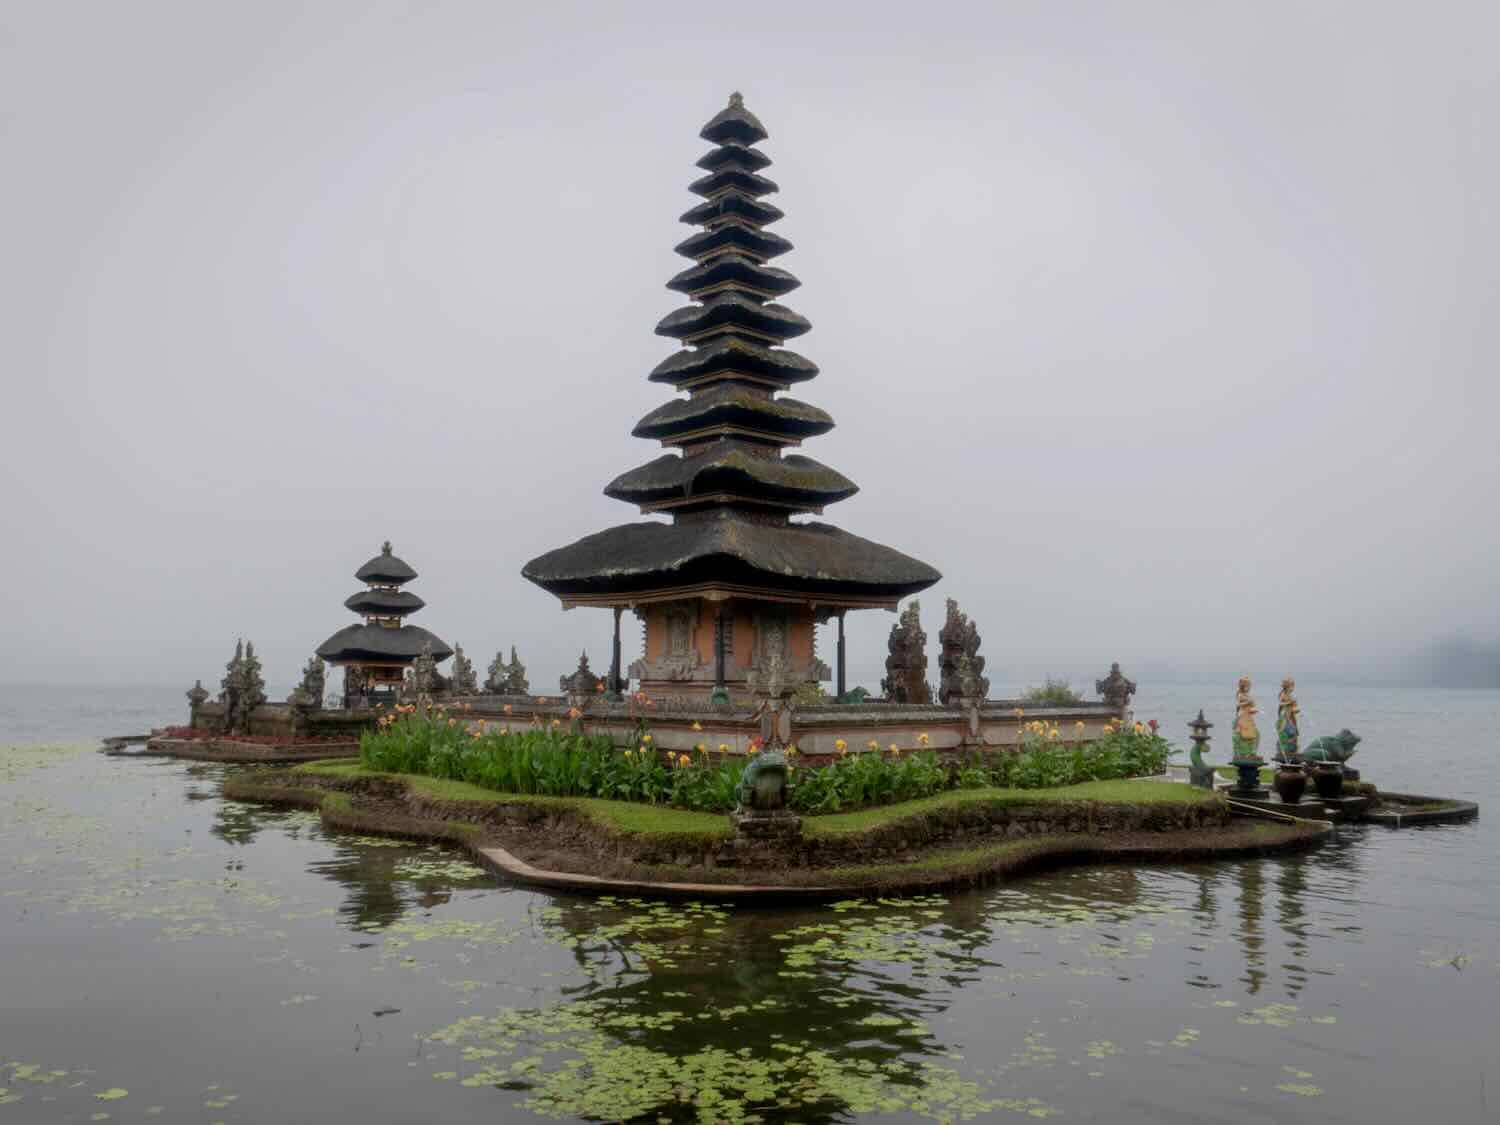 Unique Things to Do in Bali for Art and Culture